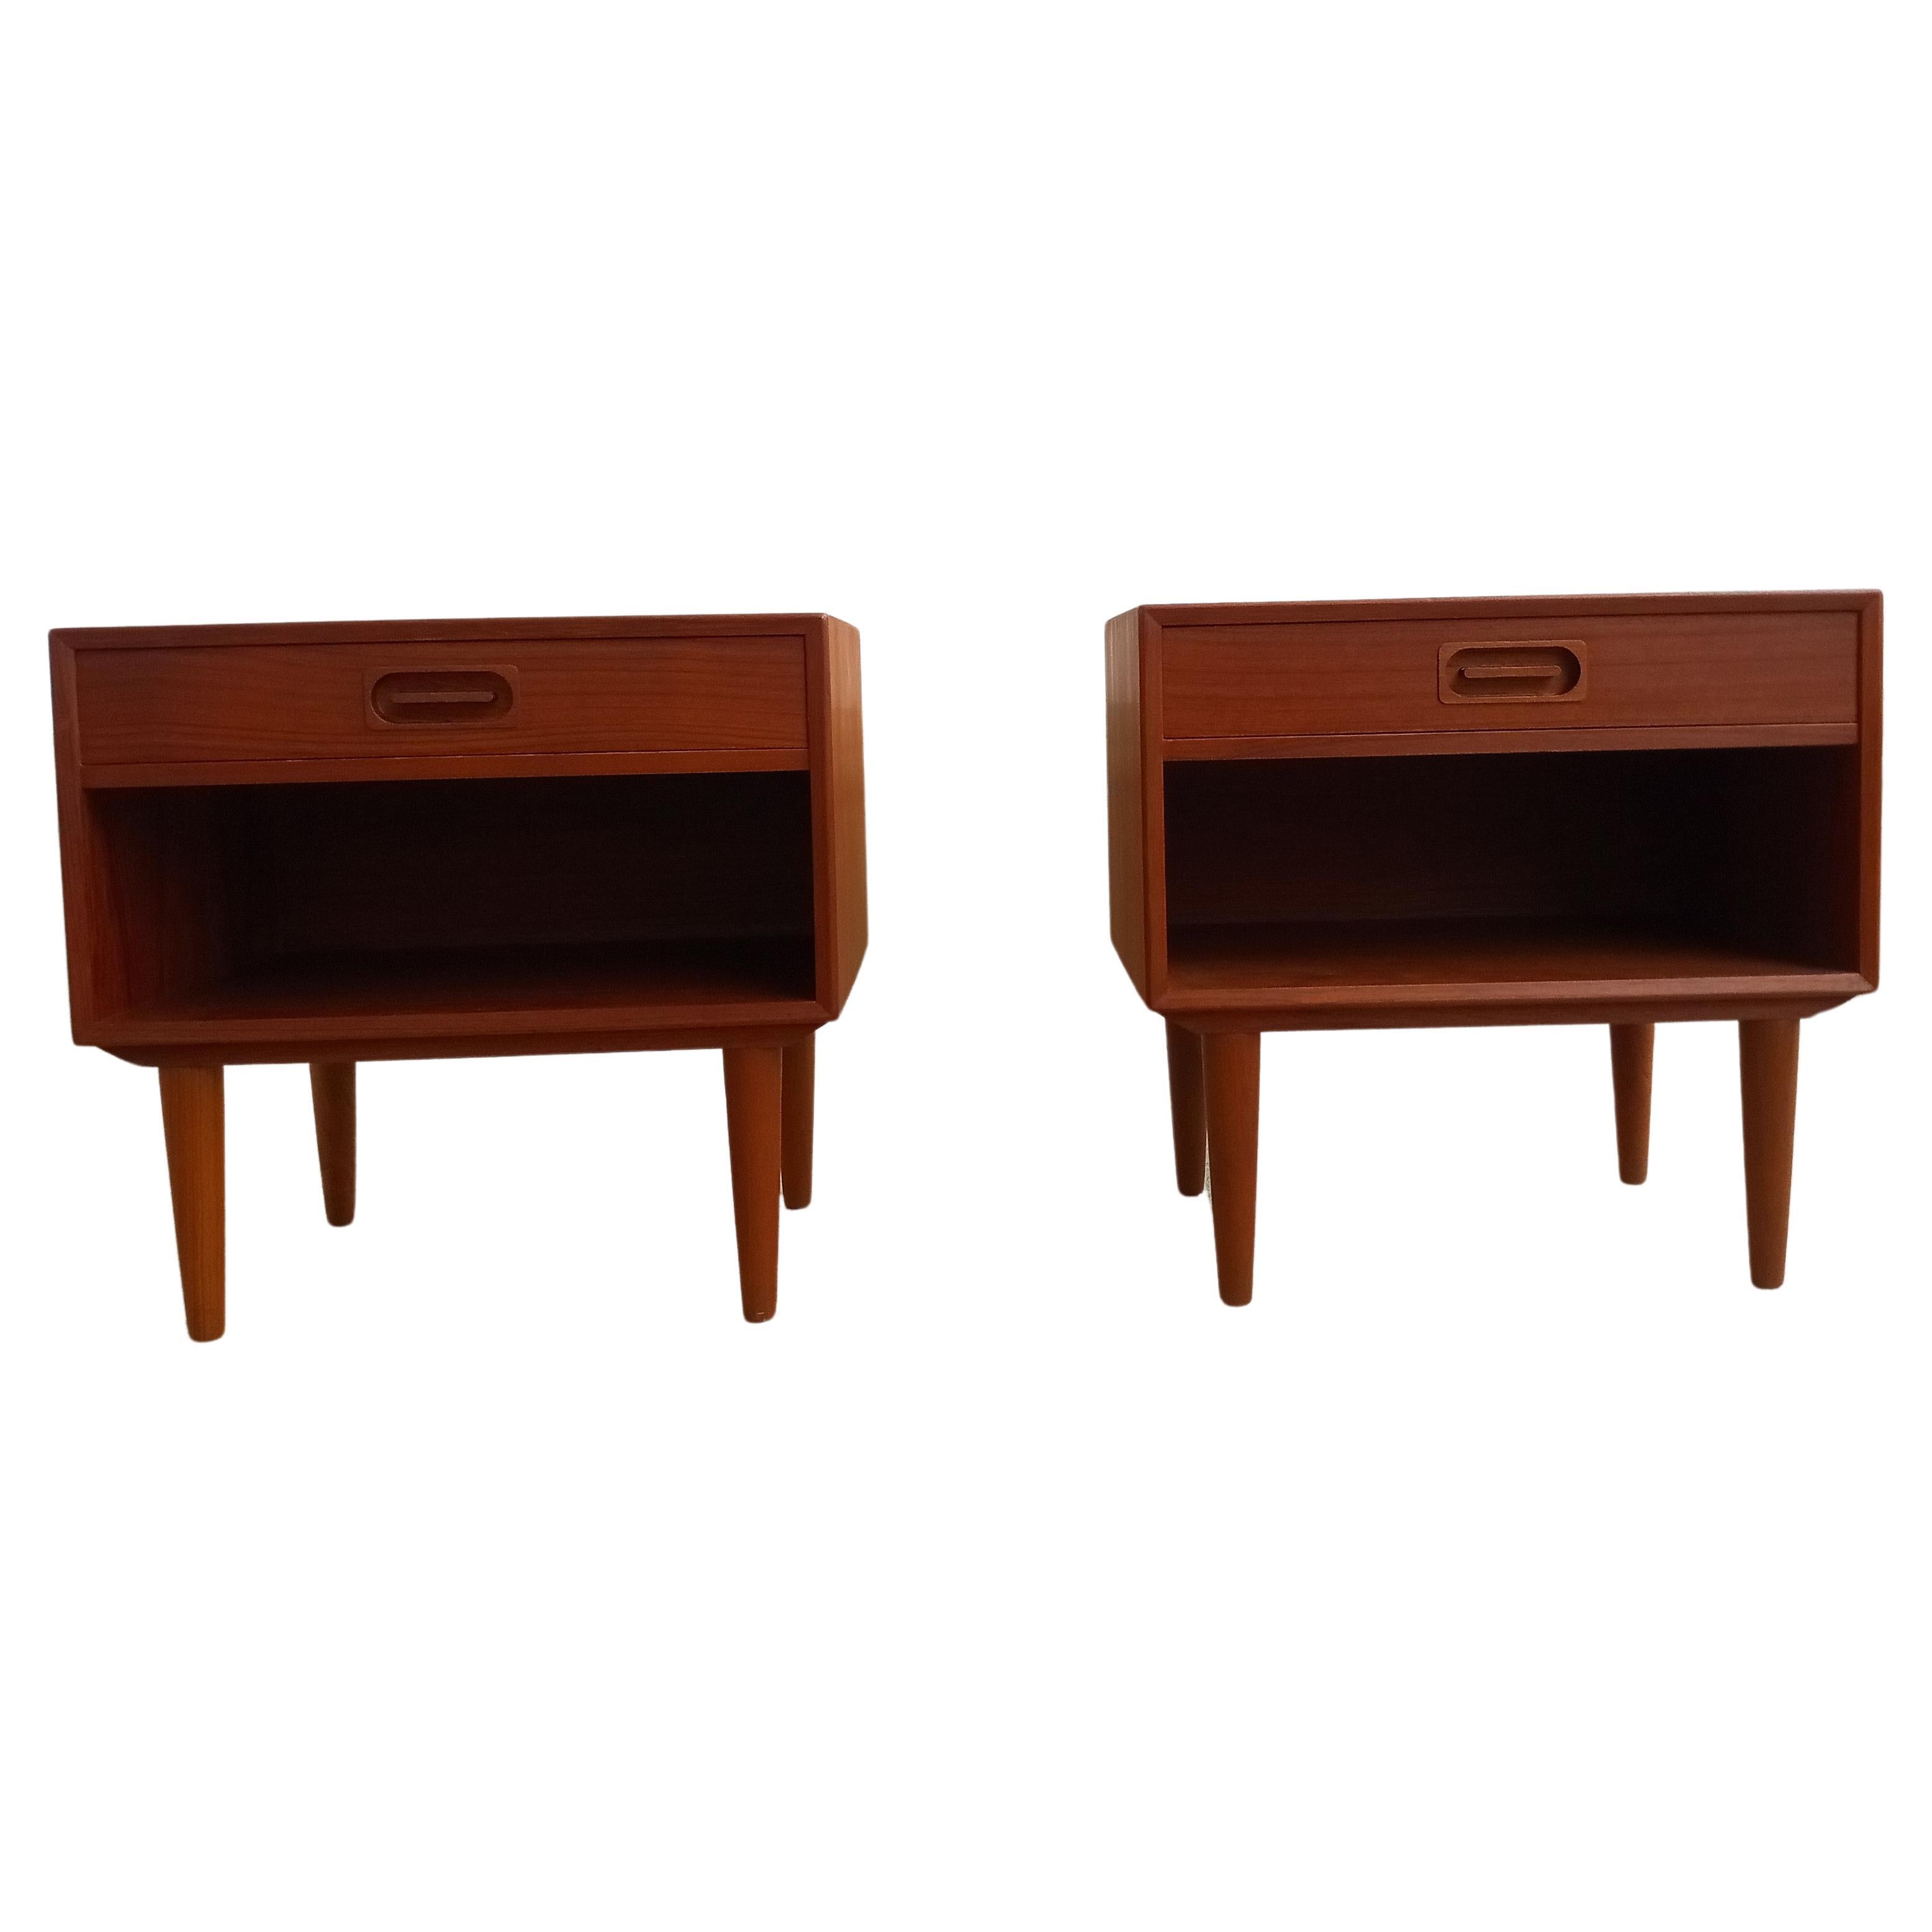 nice pair of nightstands attr. by Johannes Andersen for Dyrlund in good used condition. 